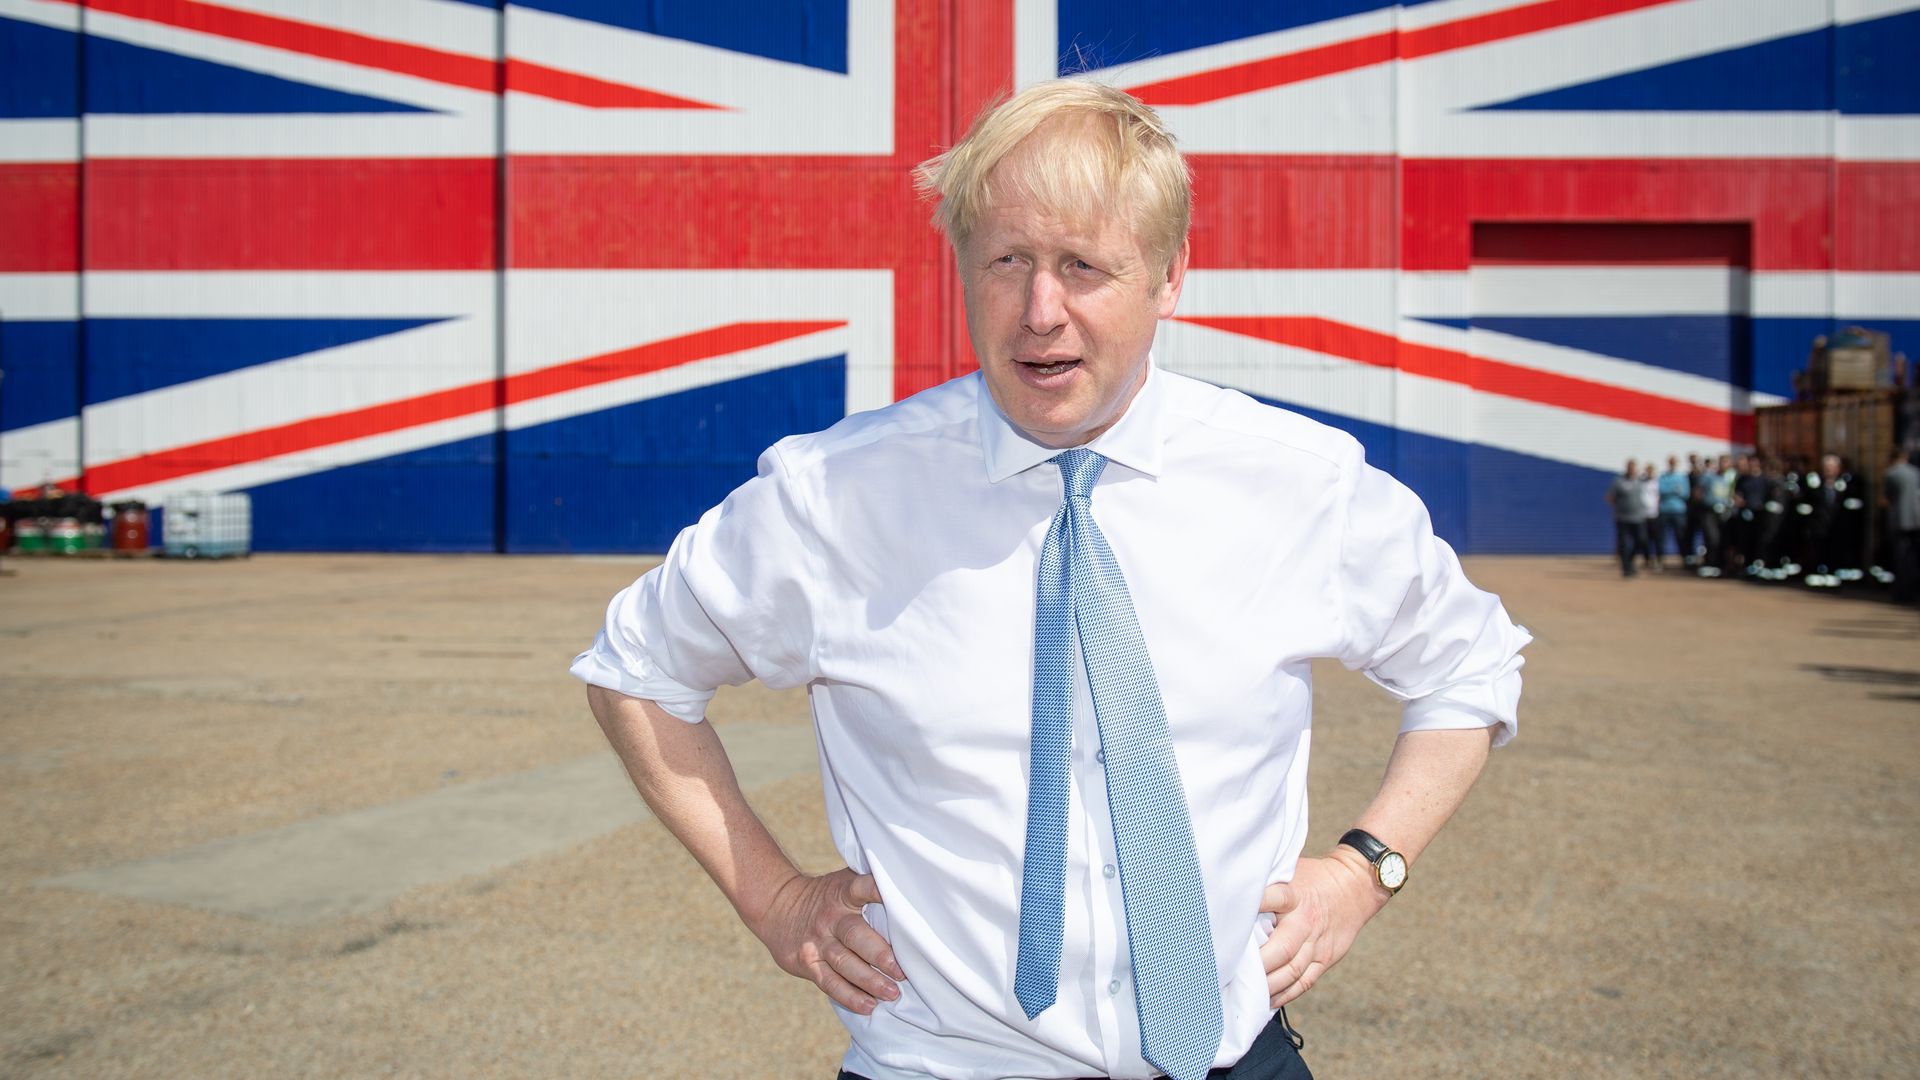 Then-Conservative party leadership contender Boris Johnson  in front of a Union Jack on a wall at the Wight Shipyard Company at Venture Quay during a visit to the Isle of Wight on June 27